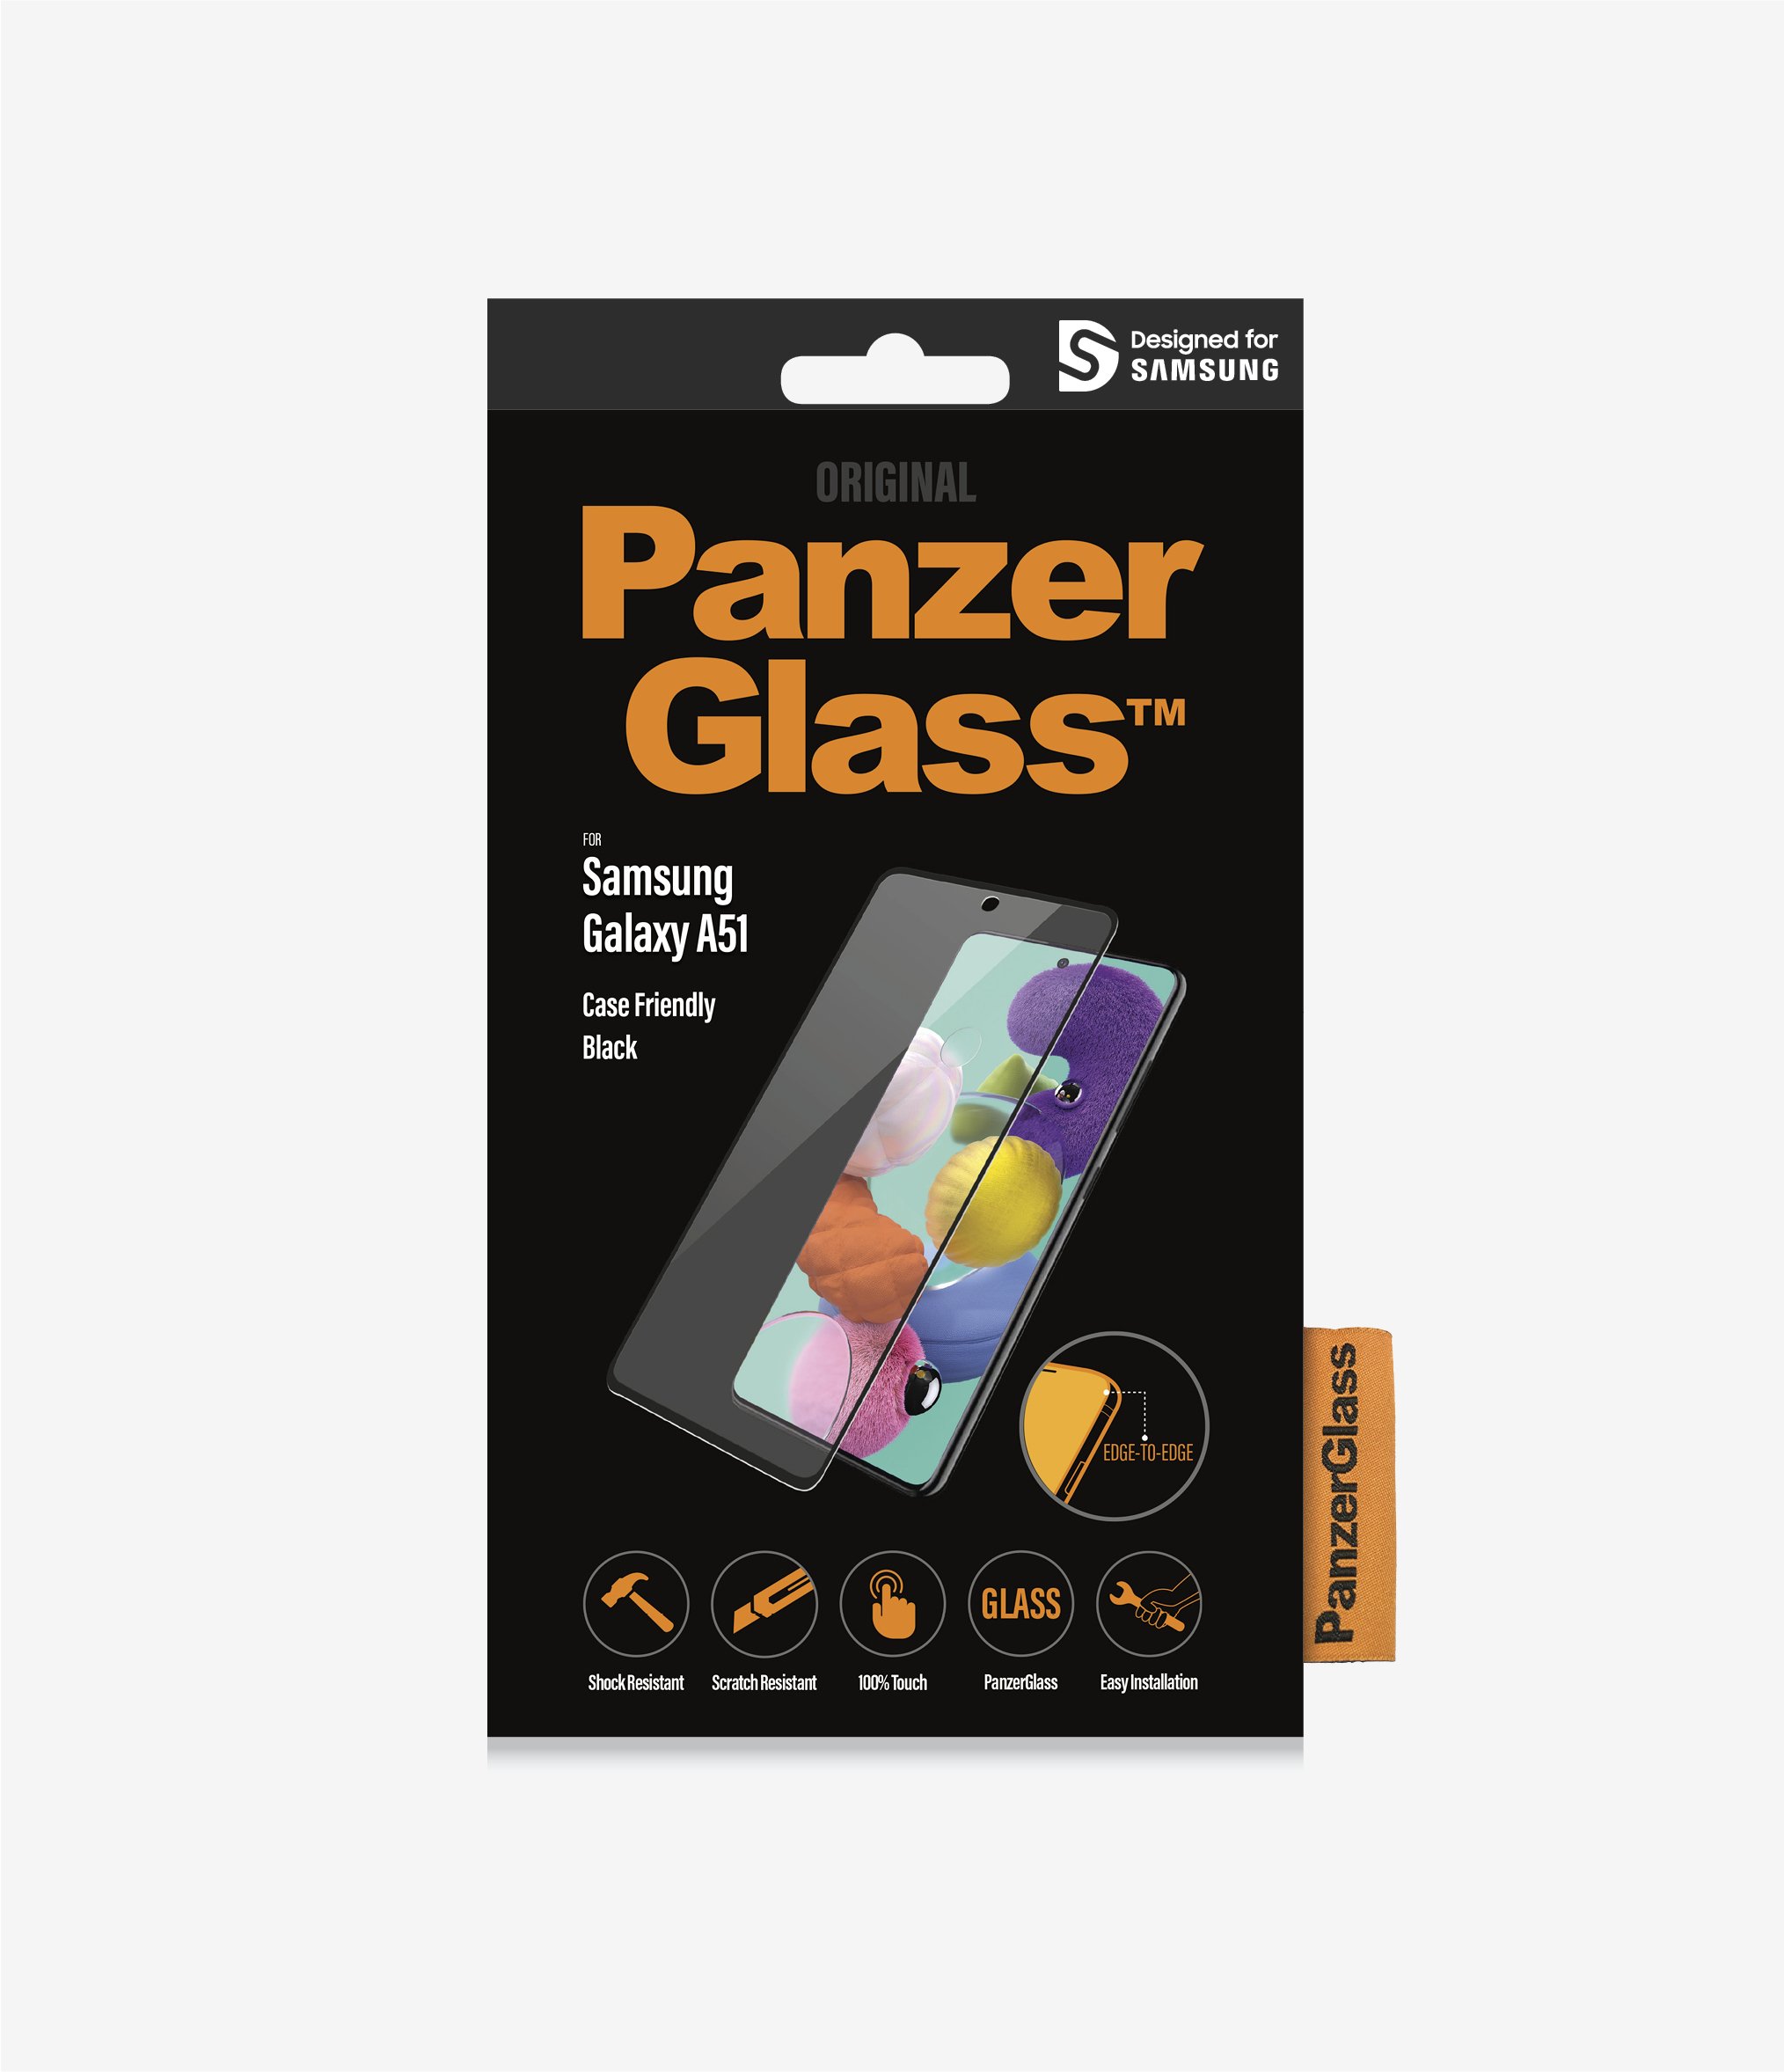 PanzerGlass™ Samsung Galaxy A51 - Black (7216) - Clear Glass - Screen Protector - Full frame coverage, Rounded edges, Crystal clear, 100% touch